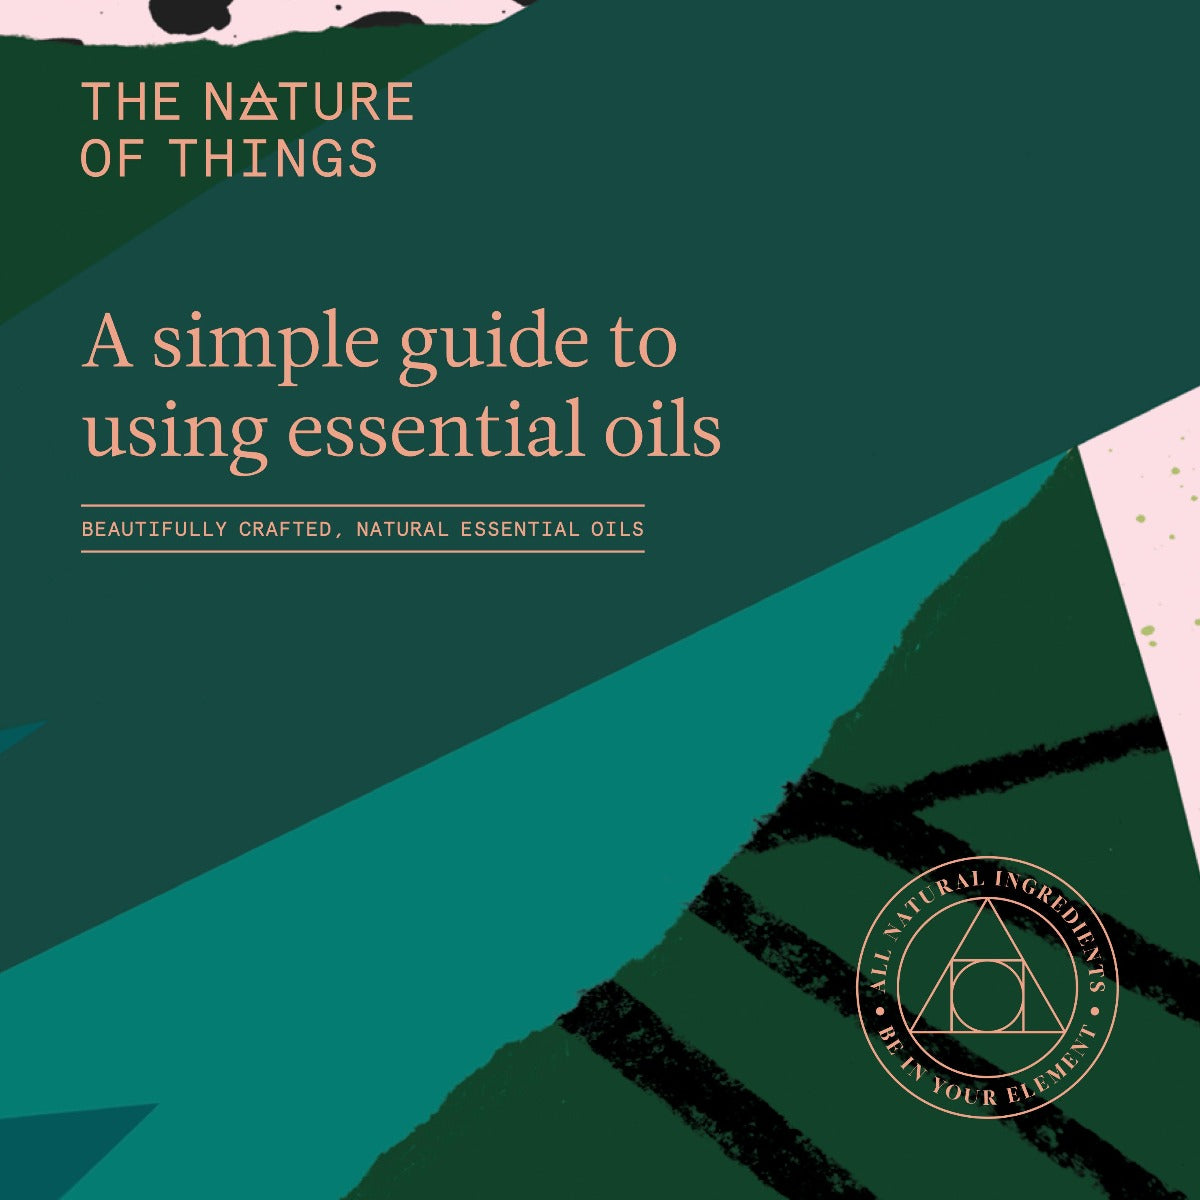 Simple Guide to Essential Oils from The Nature of Things